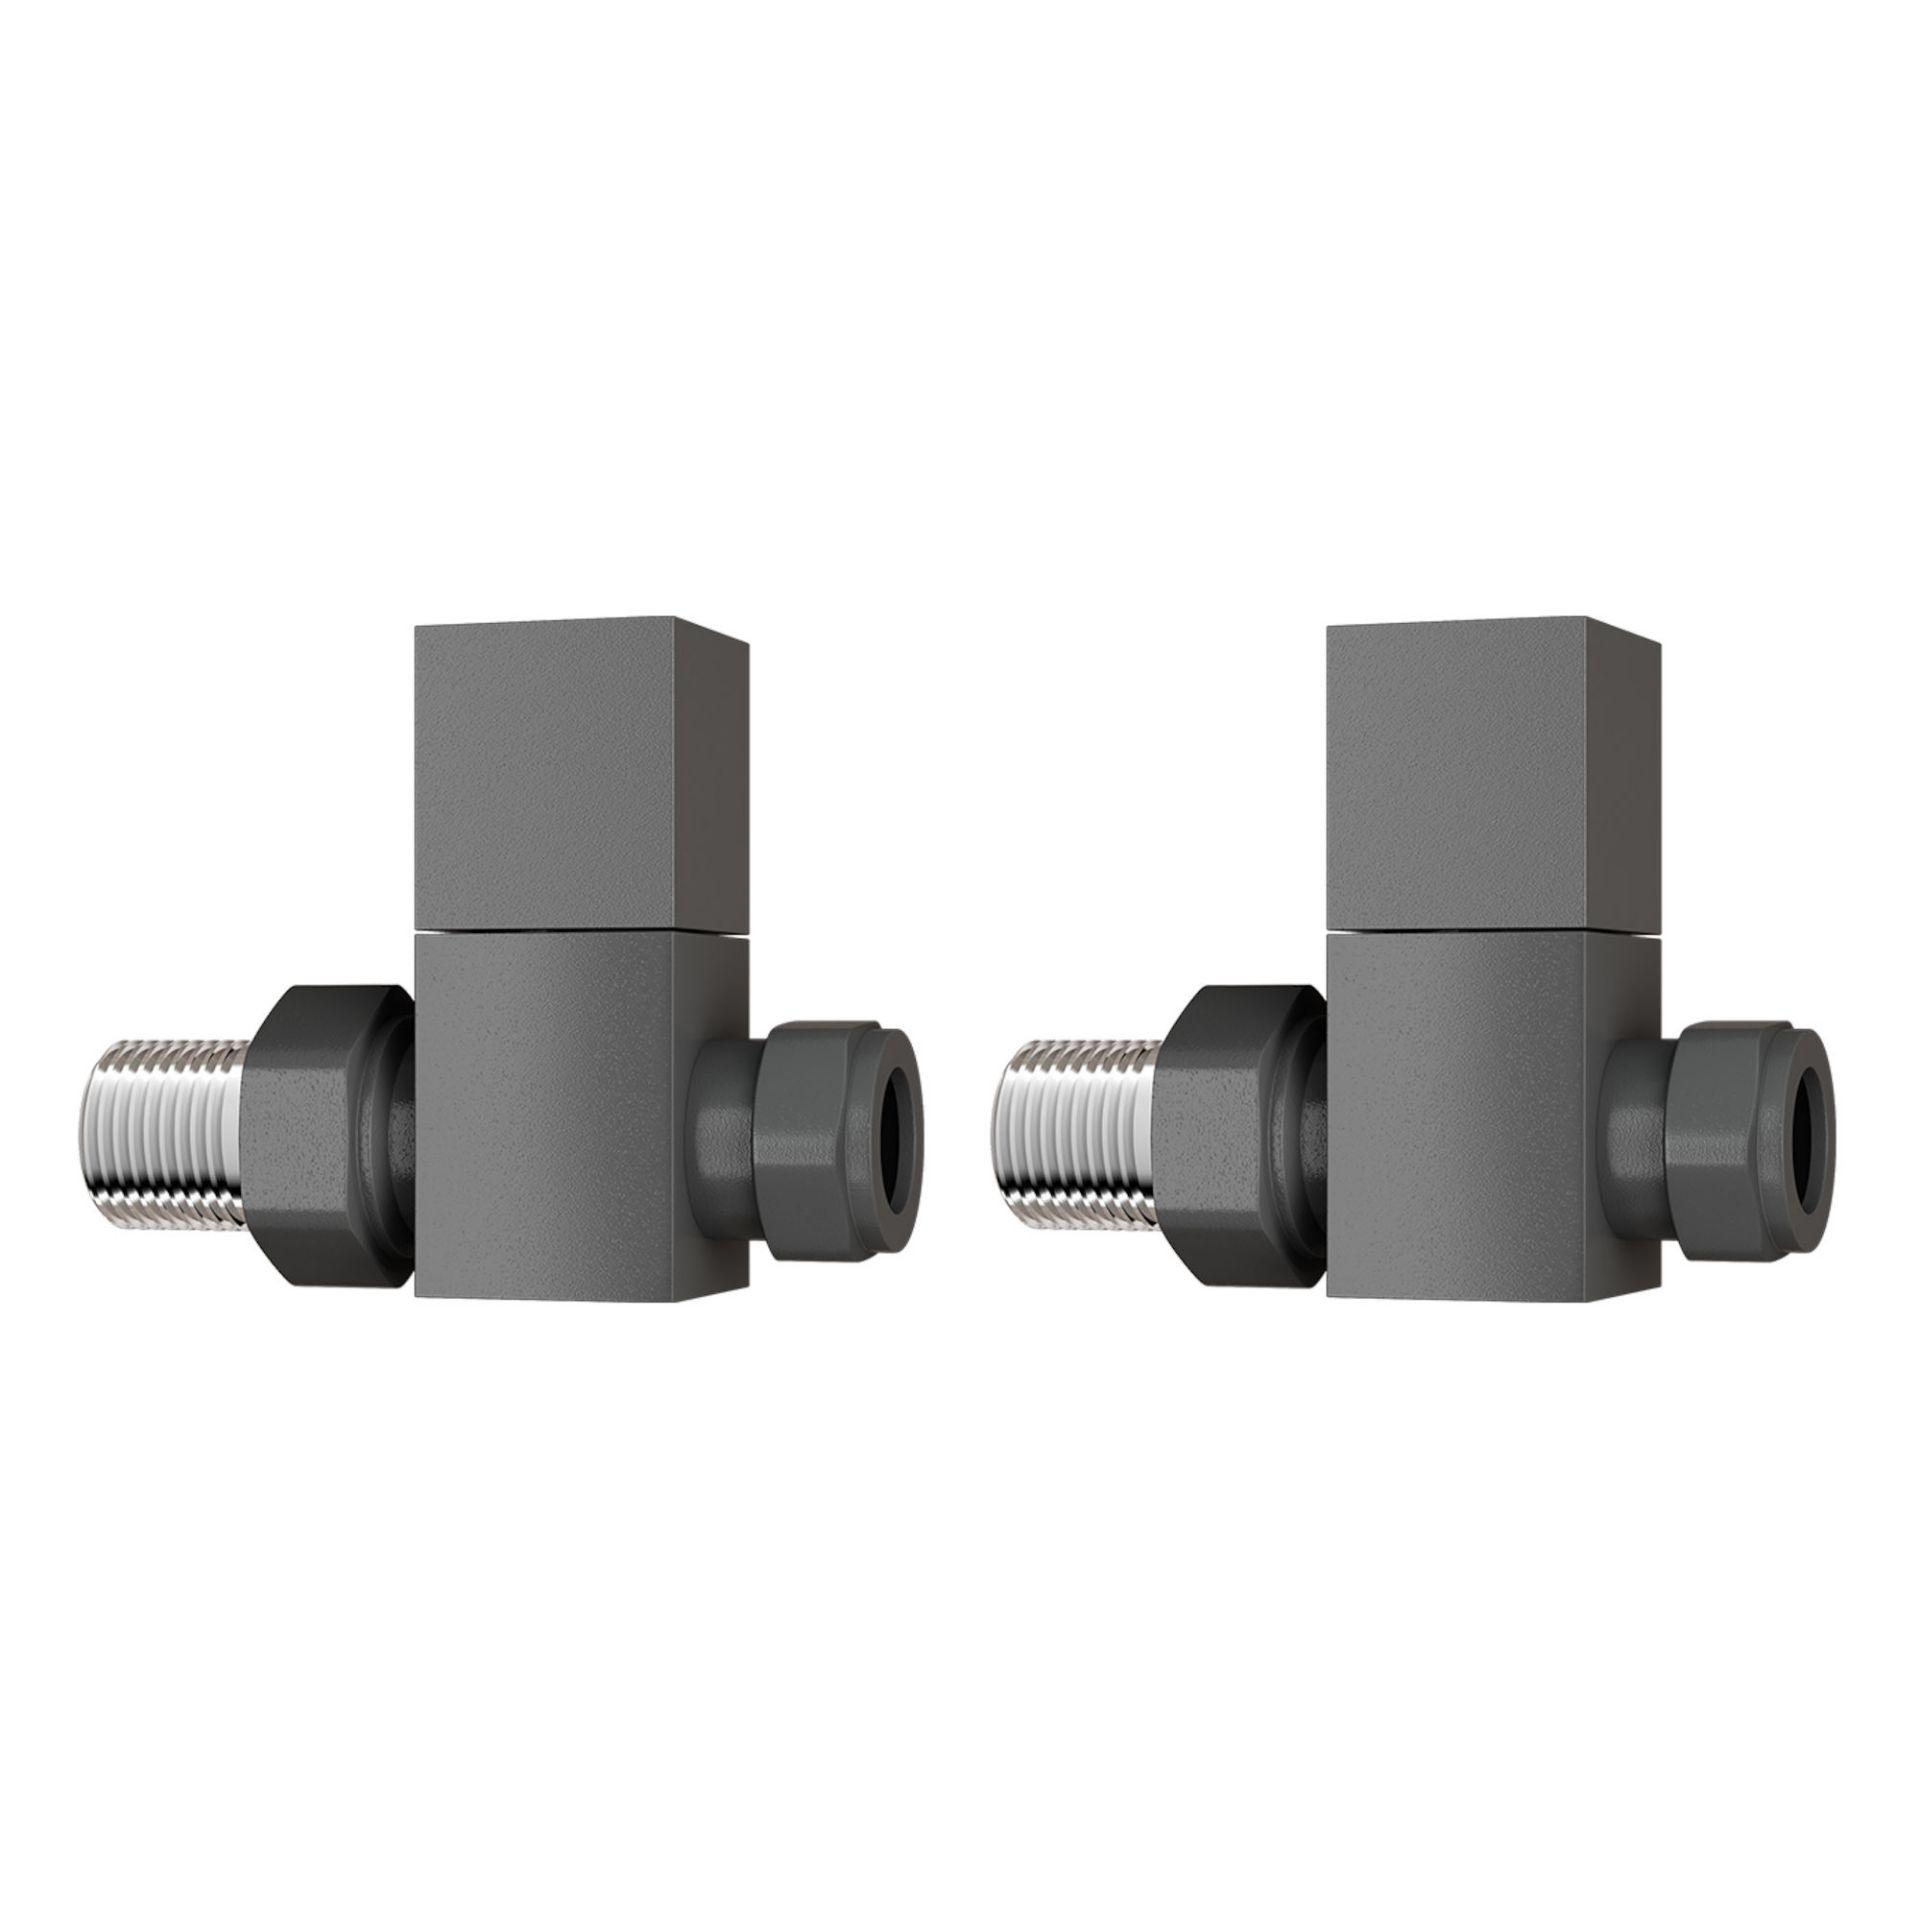 (Z1010) 15mm Standard Connection Square Straight Anthracite Radiator Valves Made of solid bras... - Image 2 of 2